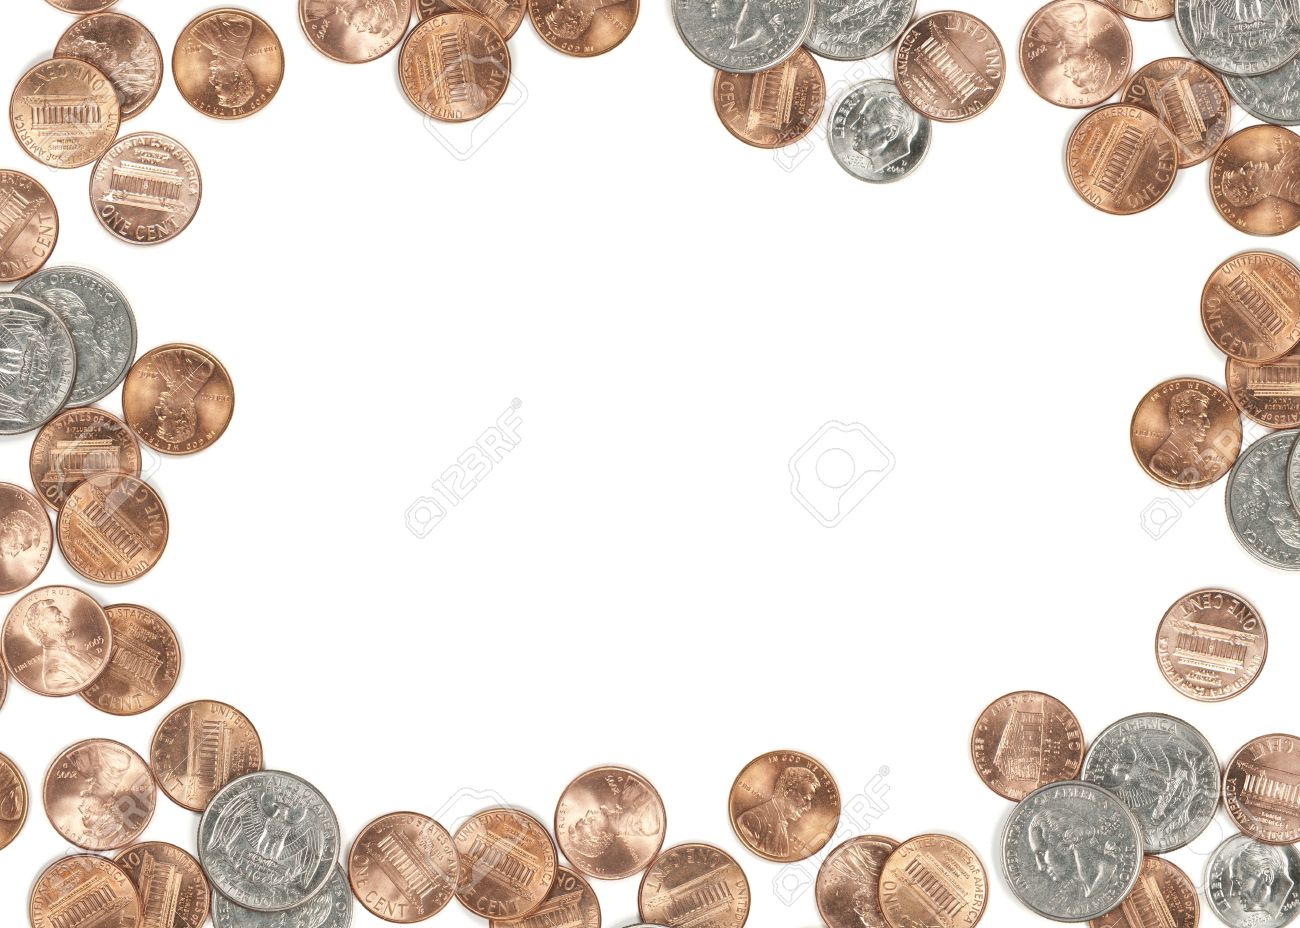 Us Coin Currency Border Isolated On White Background Focus Across